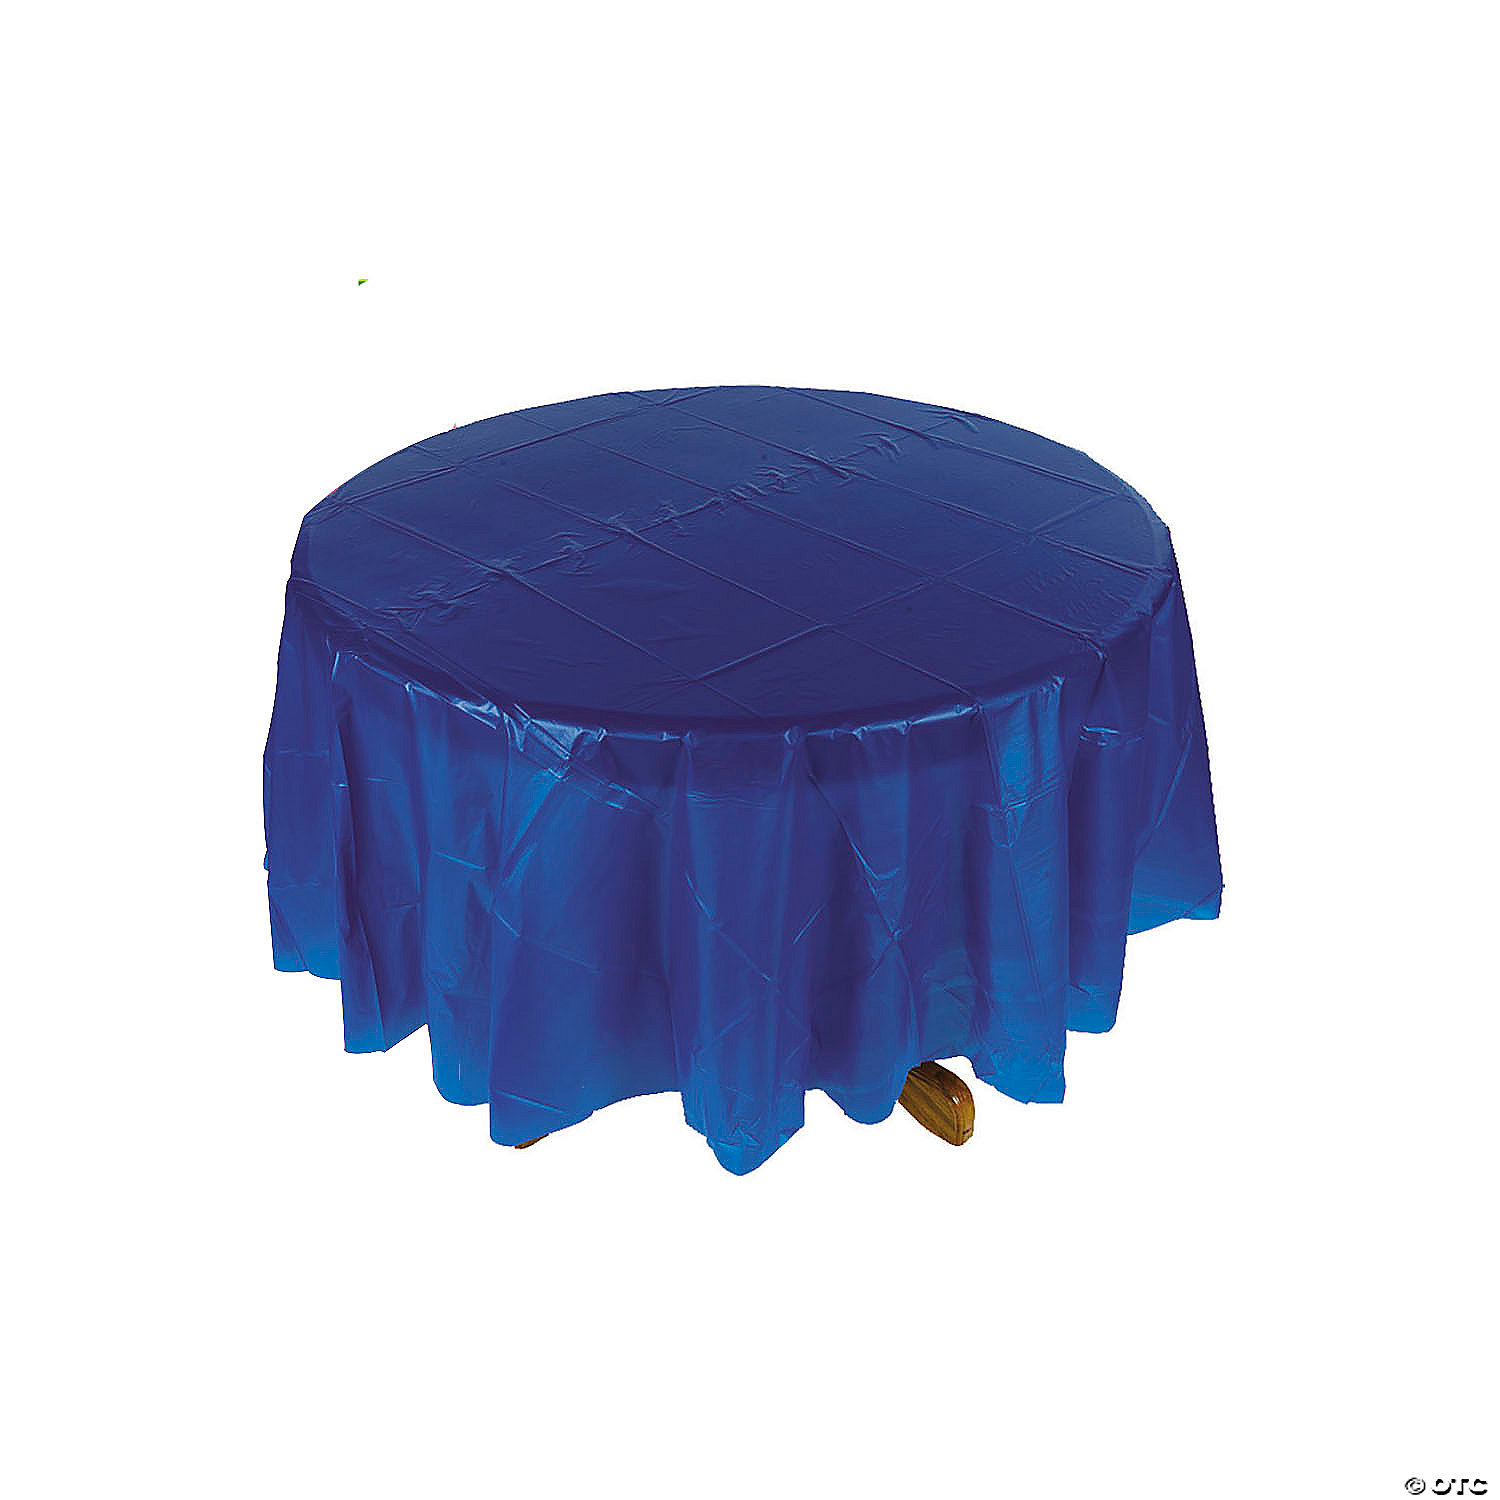 Round Plastic Tablecloth Oriental Trading, Where Can I Get Round Tablecloths